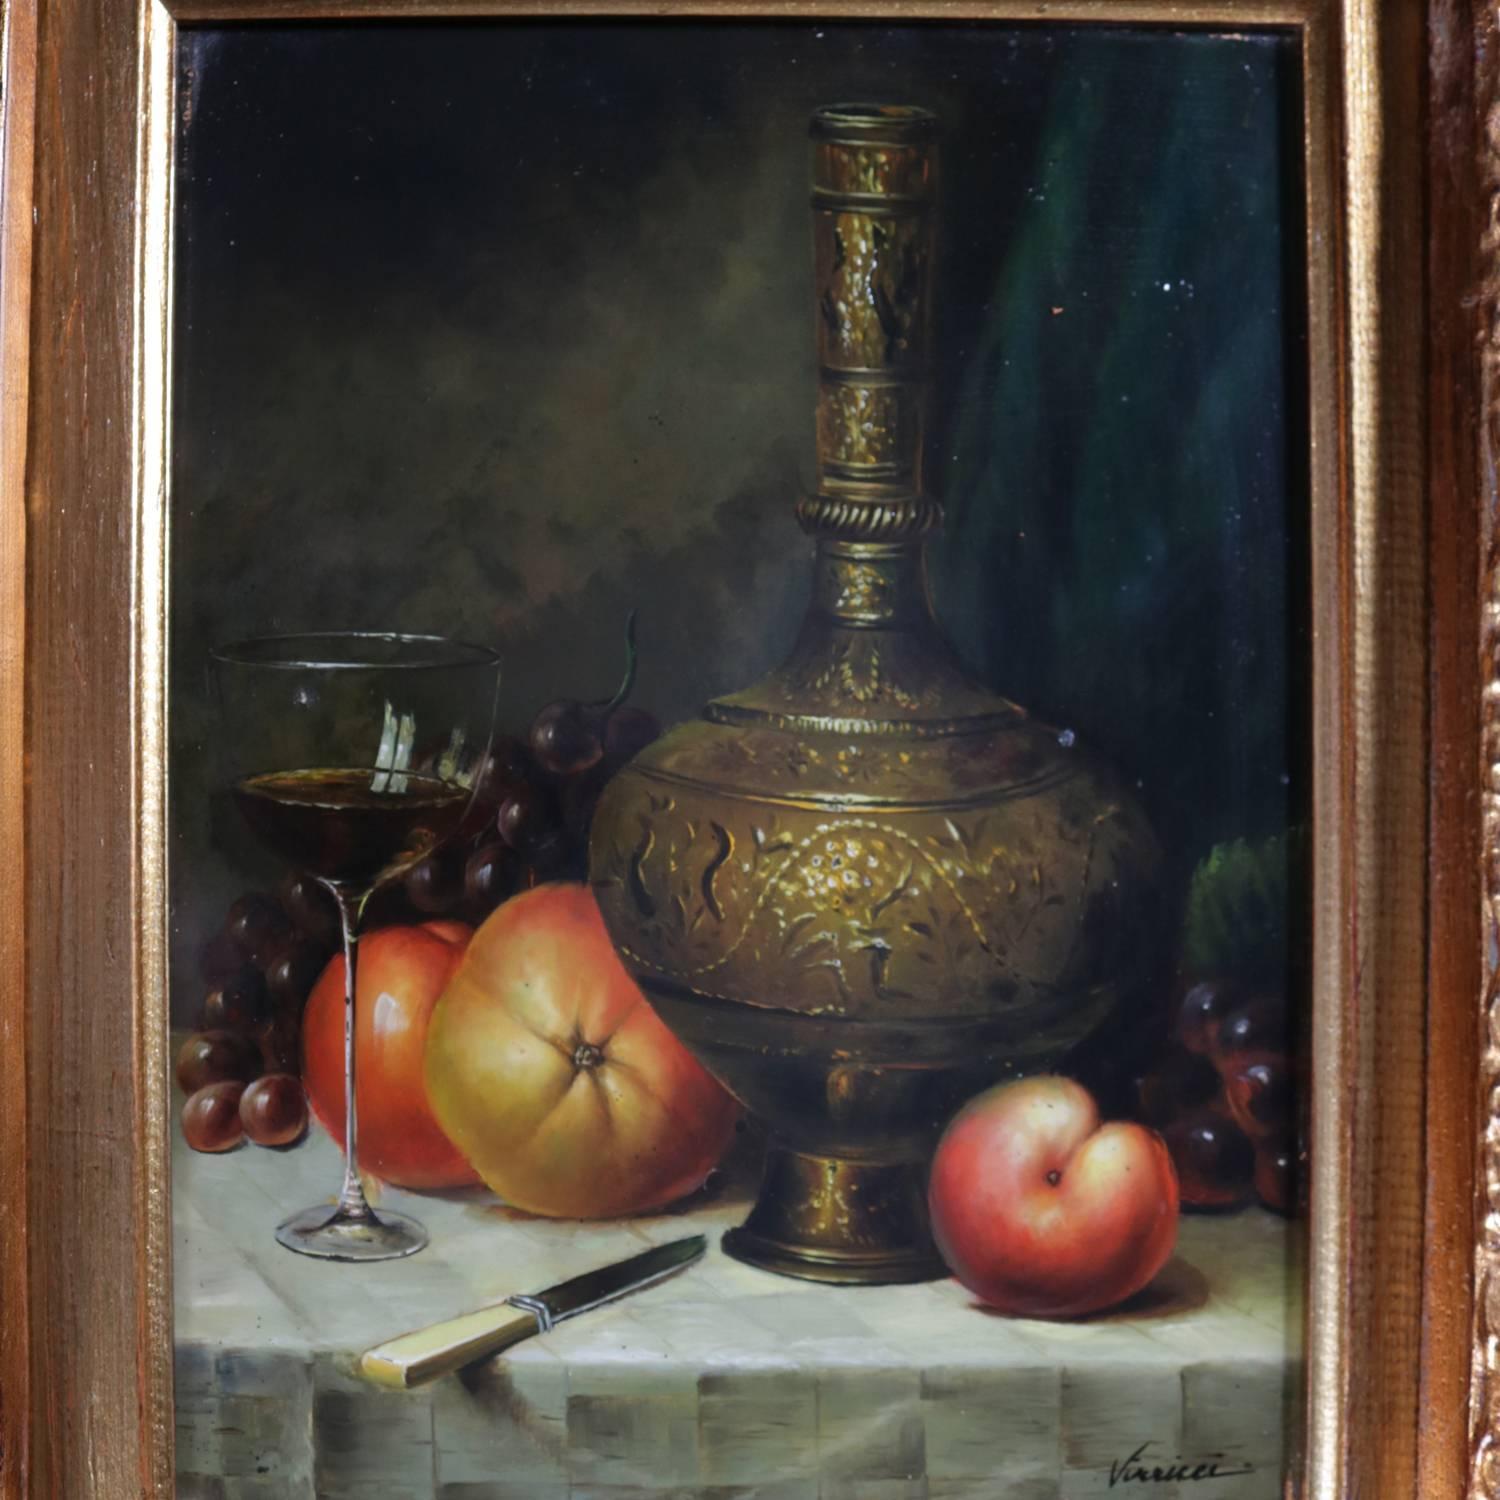 Antique Moorish oil on board still life of glass of red wine, fruit and brass vessel (decanter), signed lower right Virricci, seated in giltwood frame, 20th century

Measures: 20